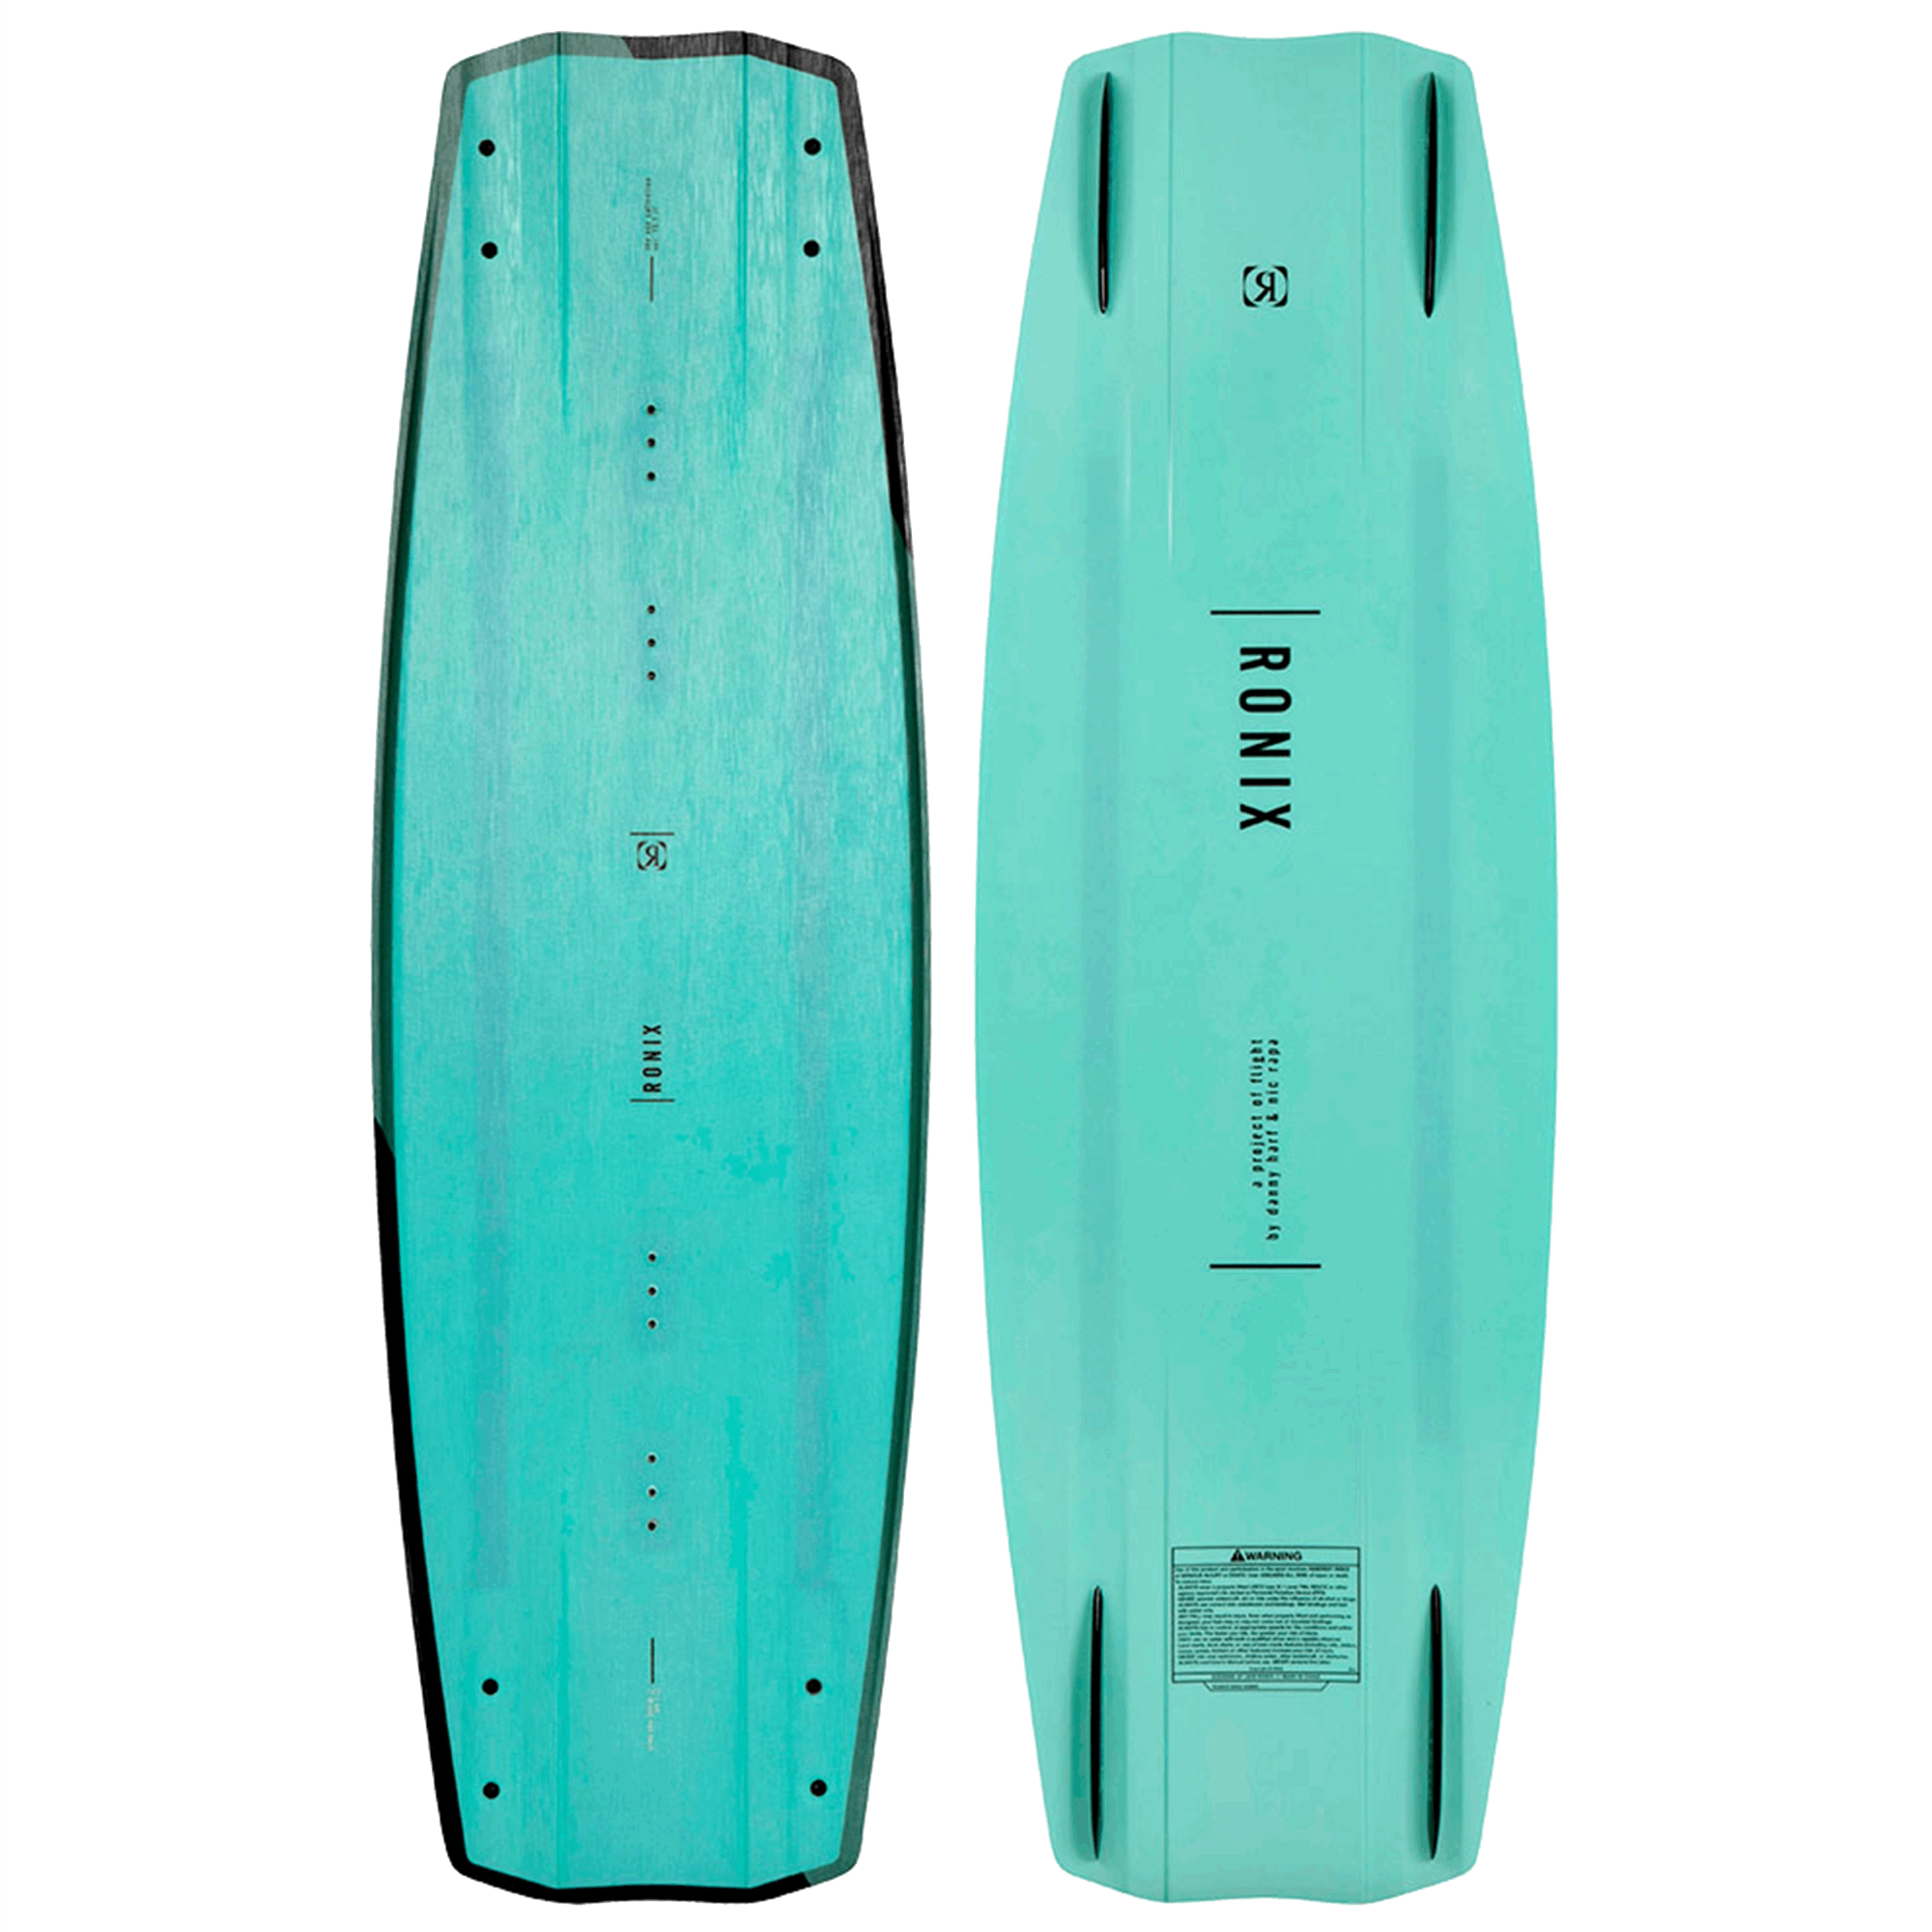 2021 Ronix One Blackout Technology Wakeboard